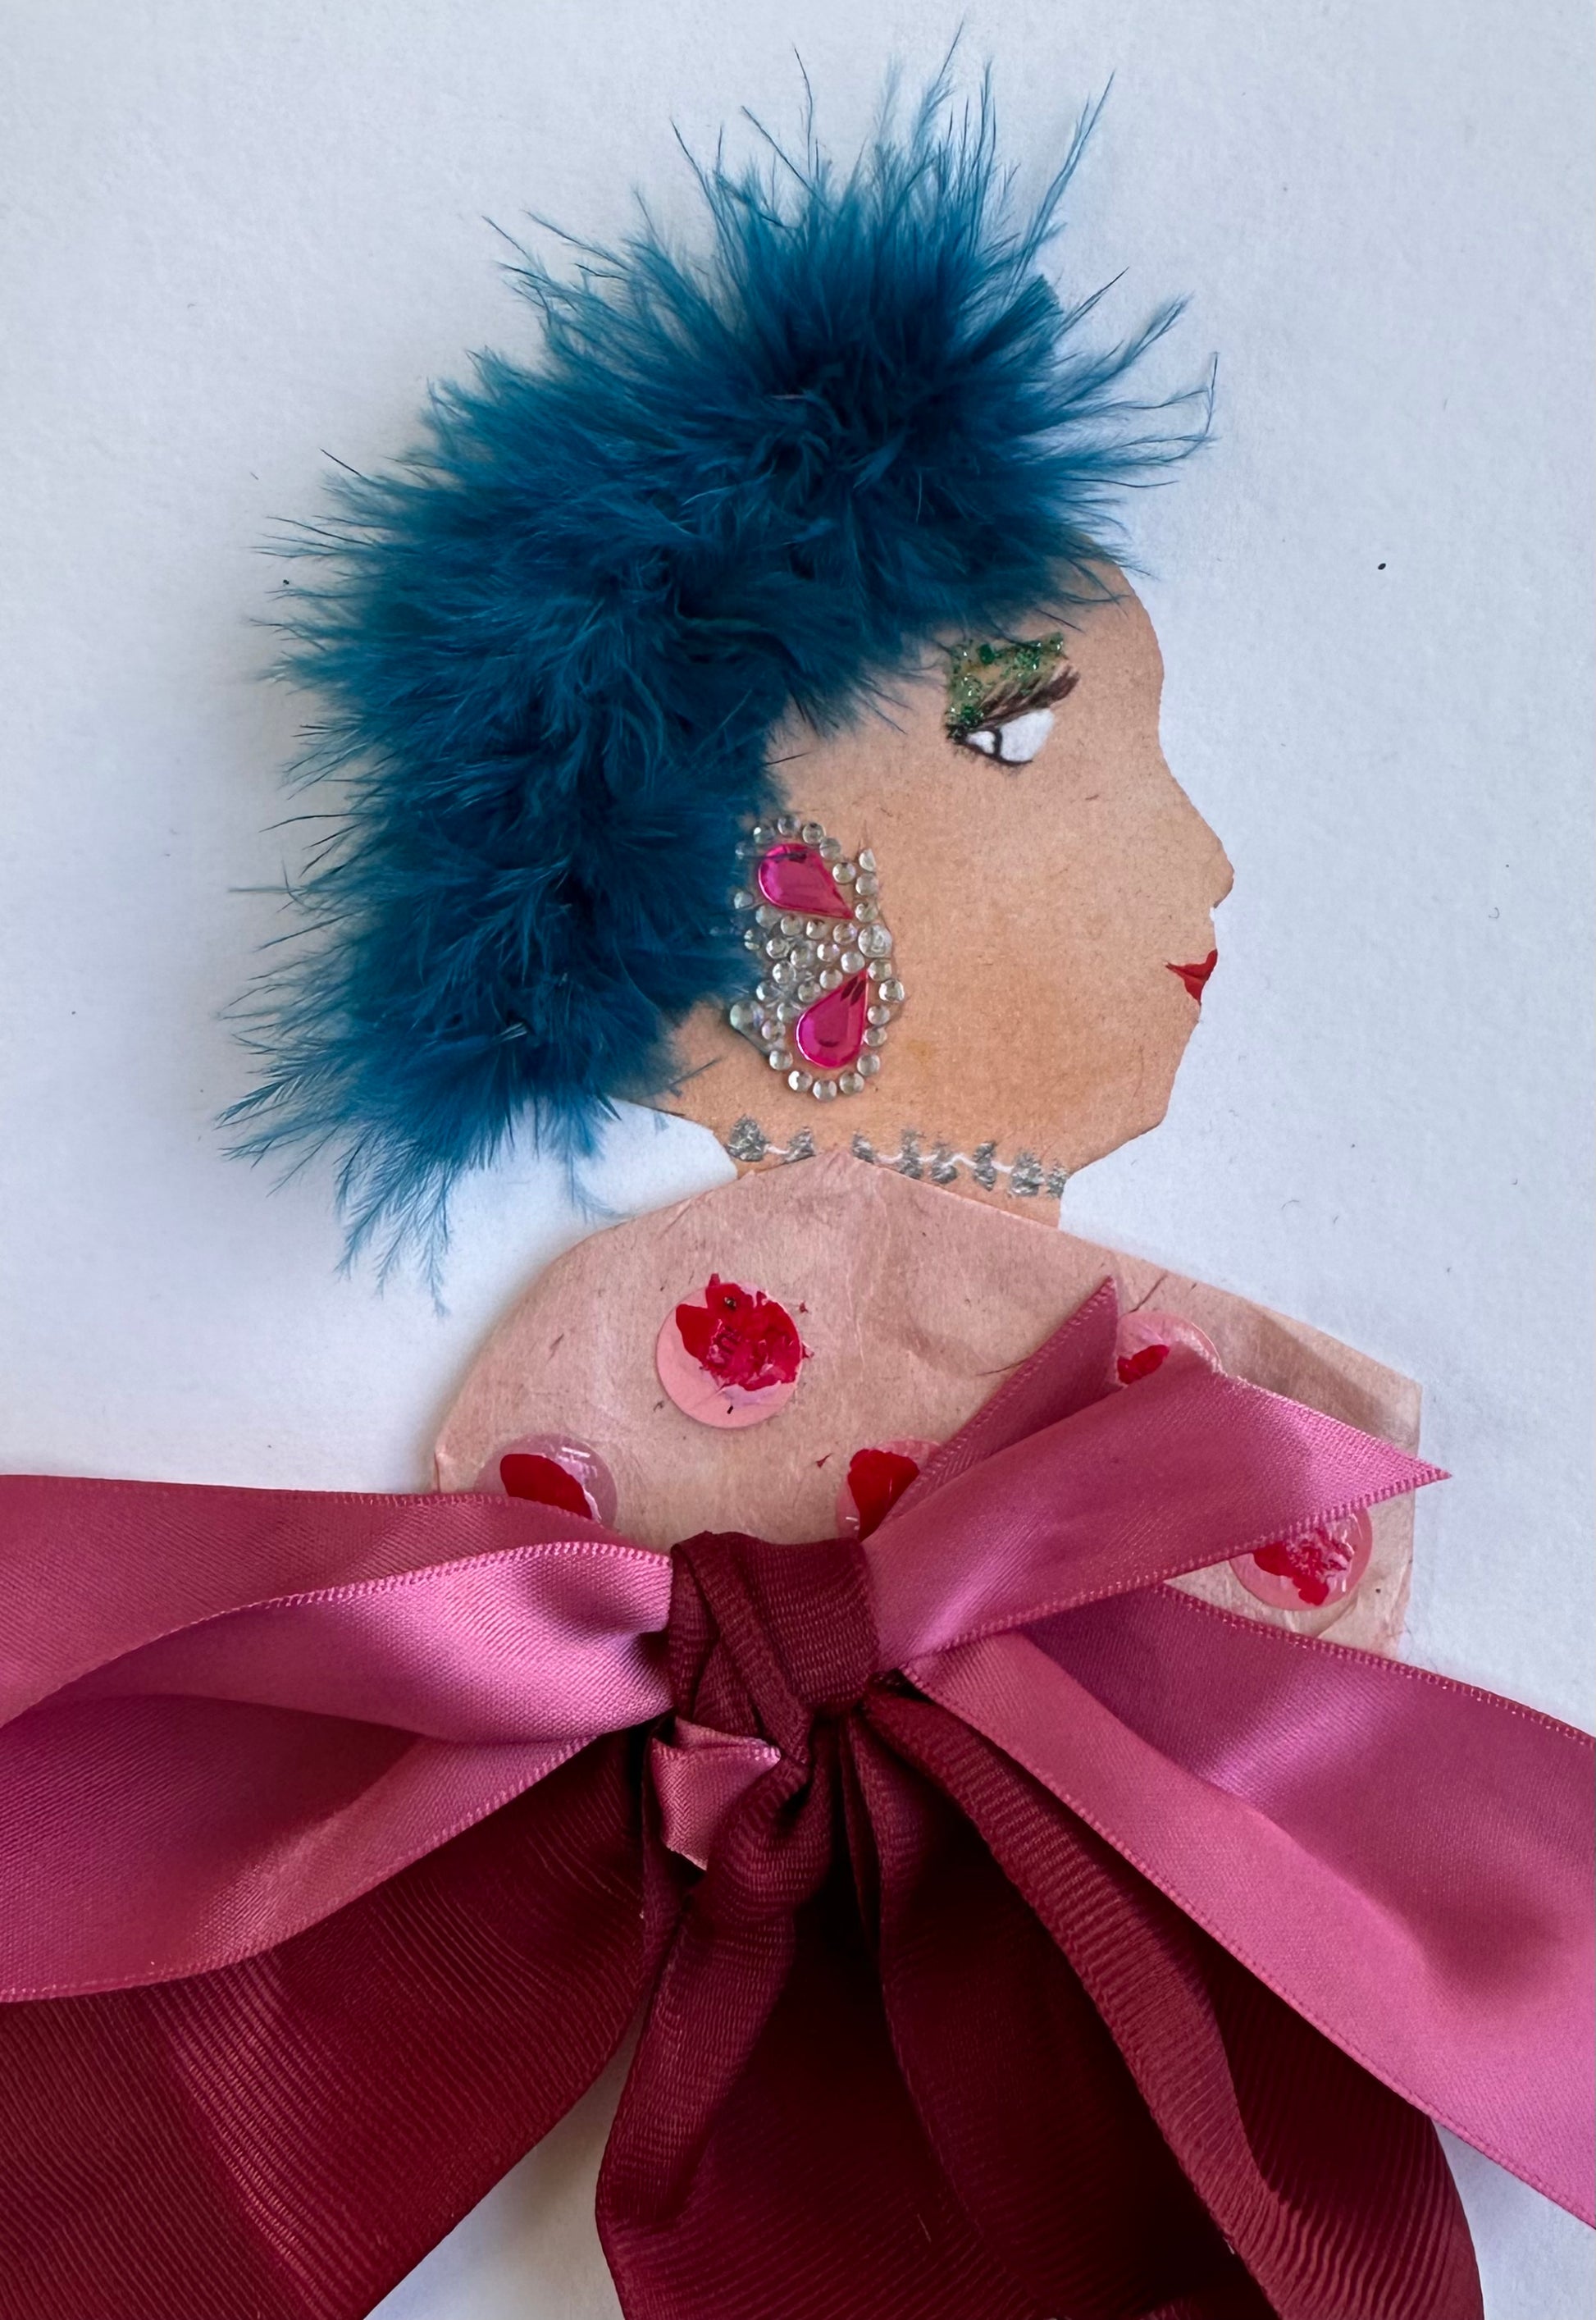 I designed this handmade card of a woman dressed in pink blouse that is made up of two pink bows. She has electric blue hair and pink gemstone jewellery, which matches her outfit.